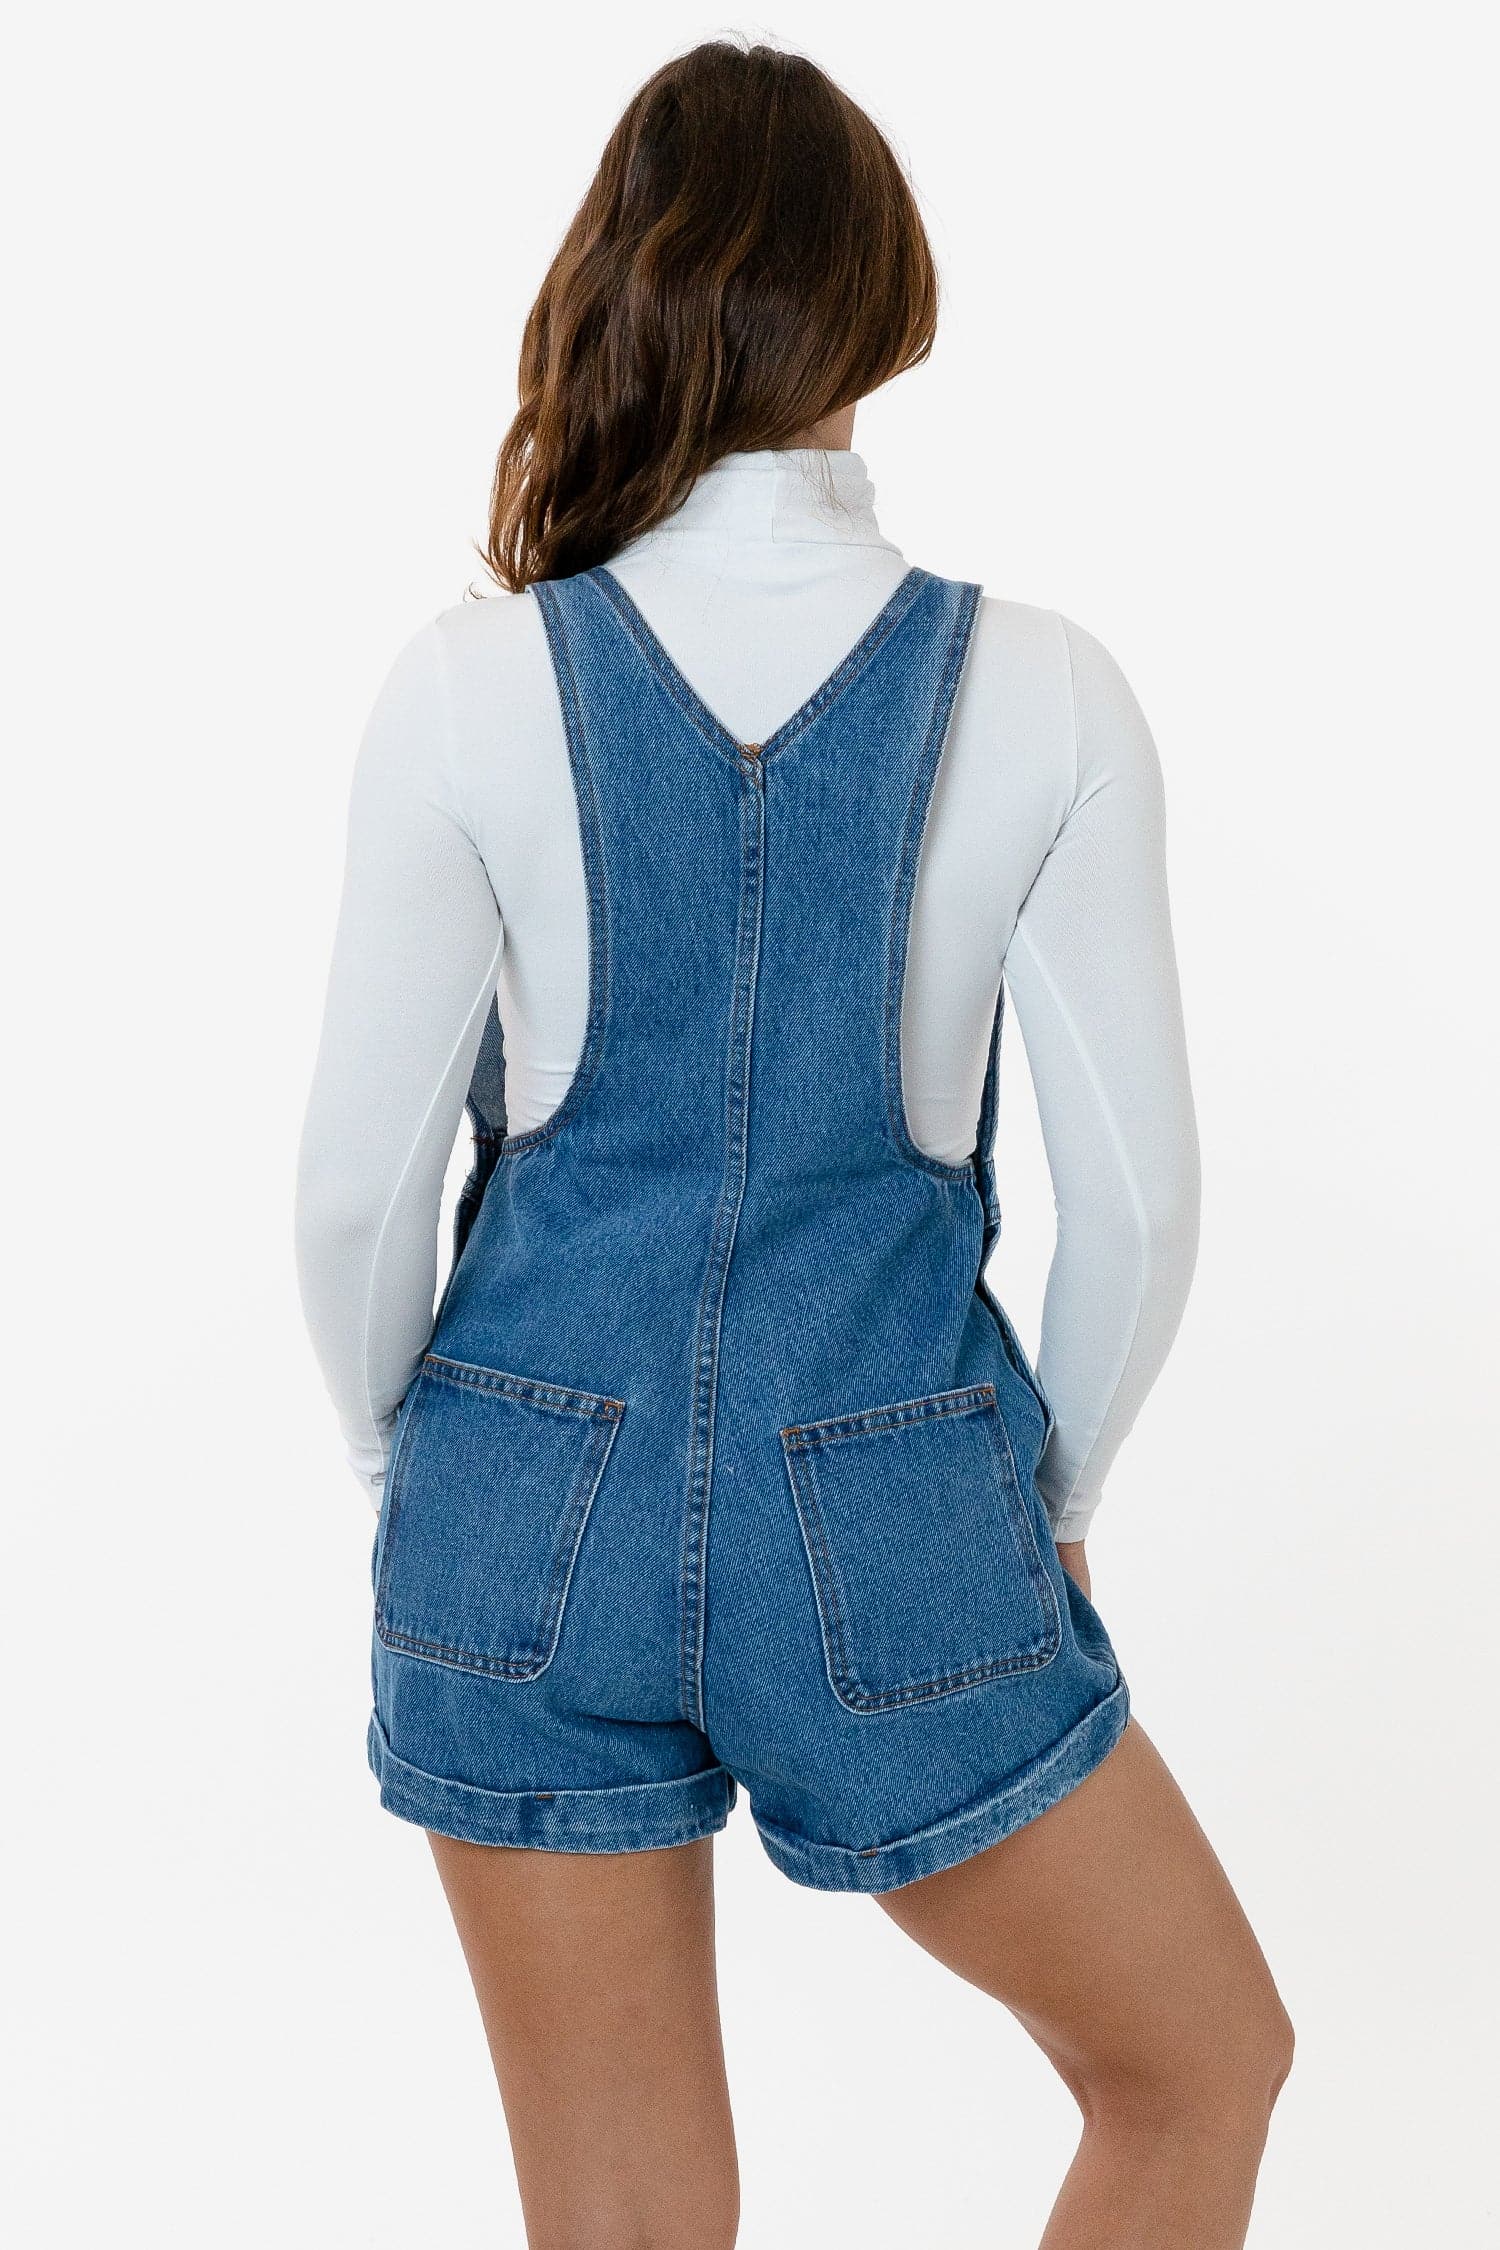 AEO Denim Overall , Medium Destroyed | American Eagle Outfitters | Clothes,  Distressed overalls, Denim overalls